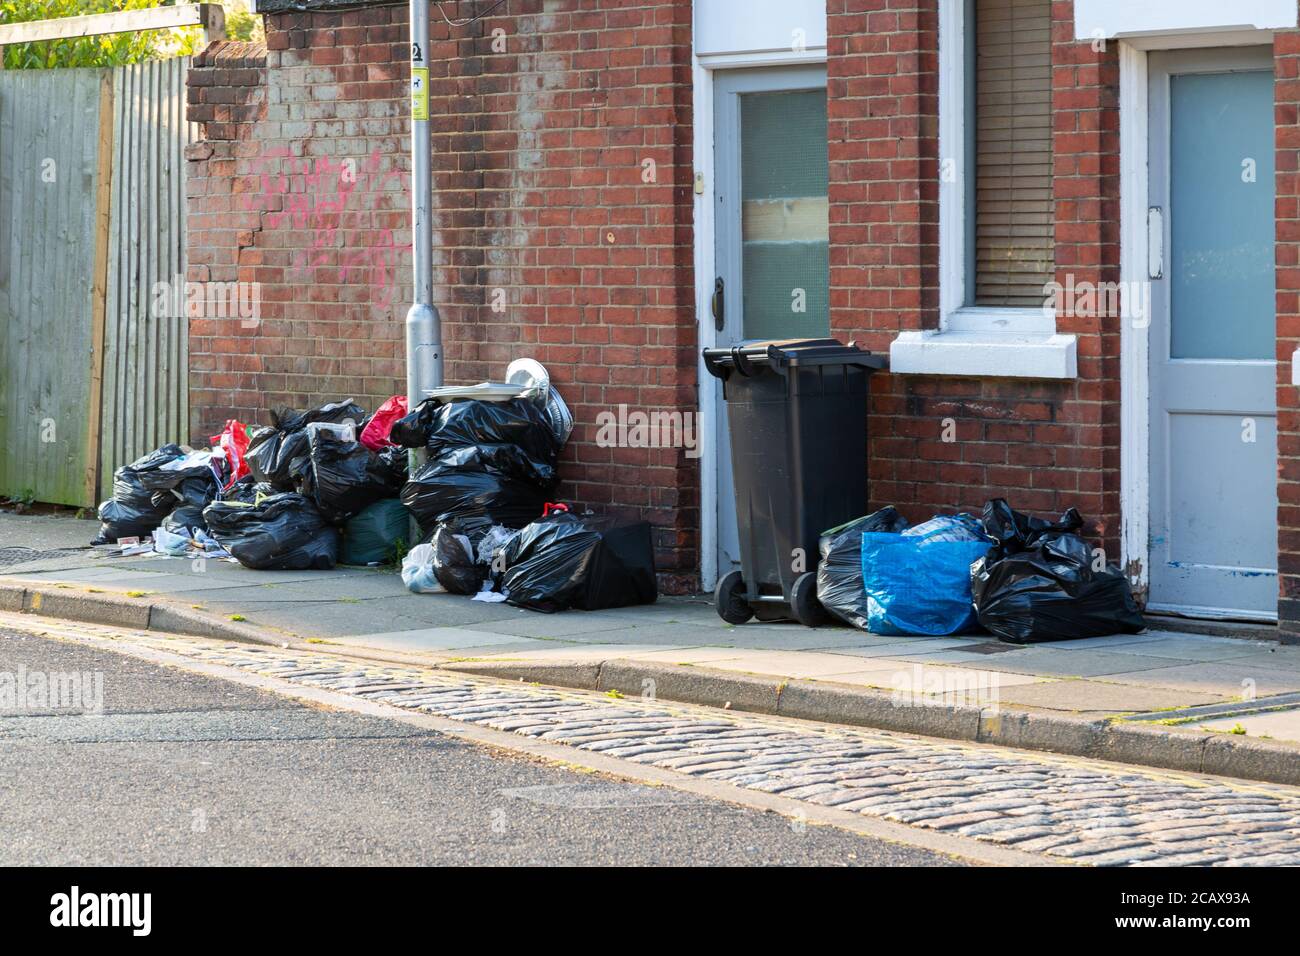 Plastic bin bags full of rubbish outside a home ready for collection by bin men on bin collection day Stock Photo